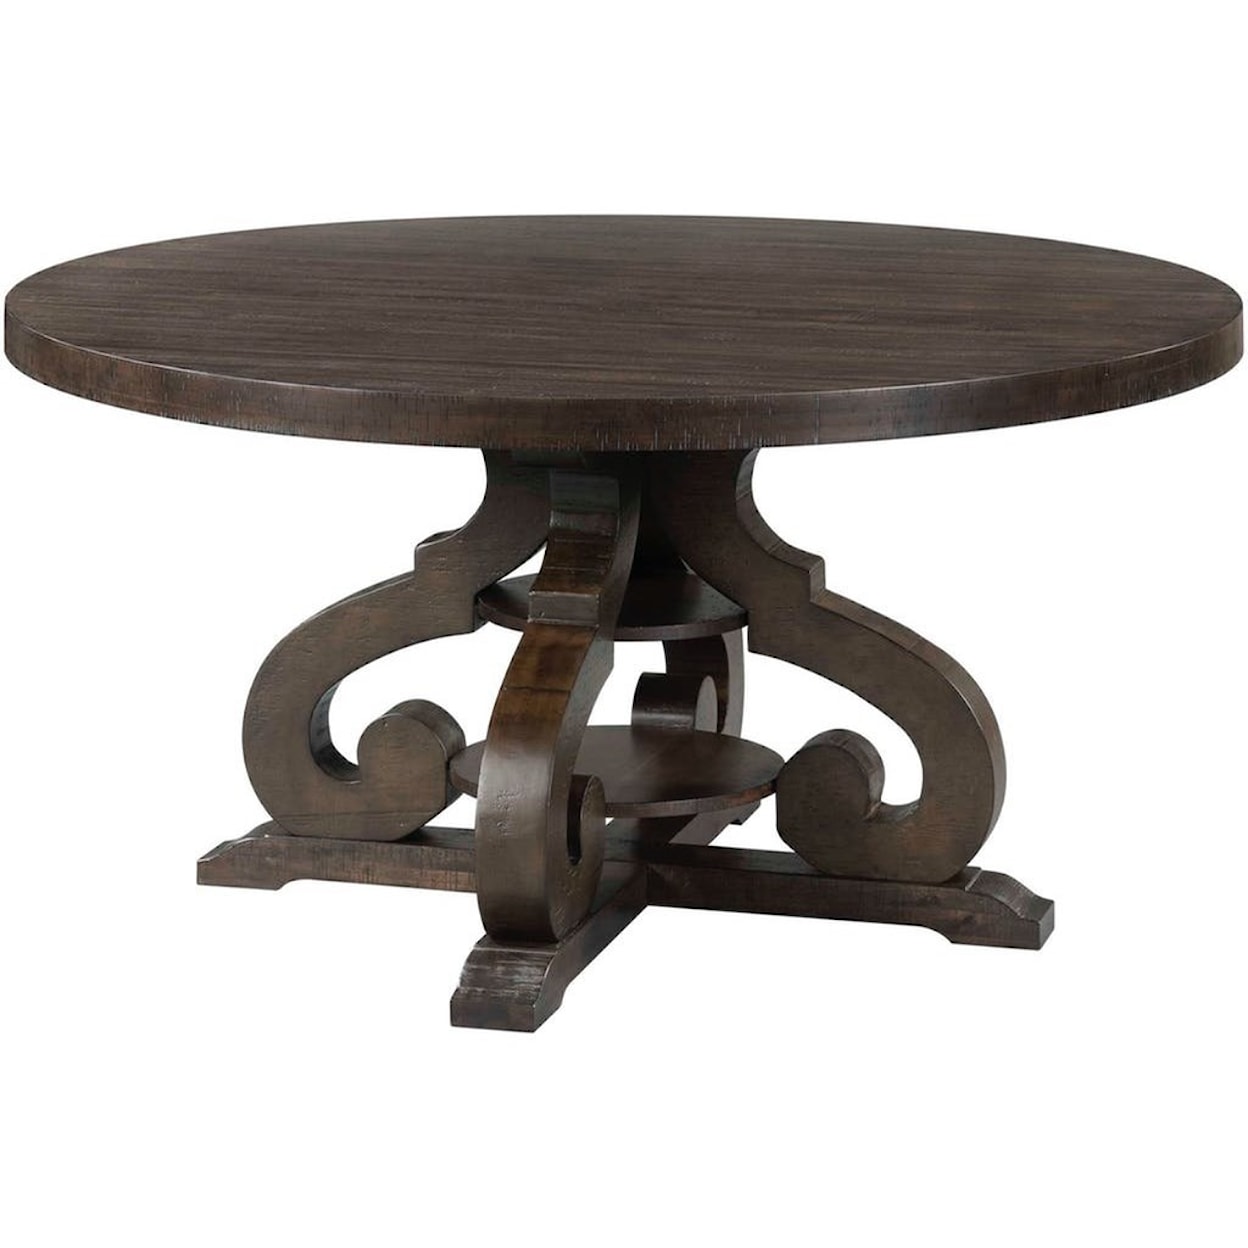 Elements International Stone Round Table and Chair Set